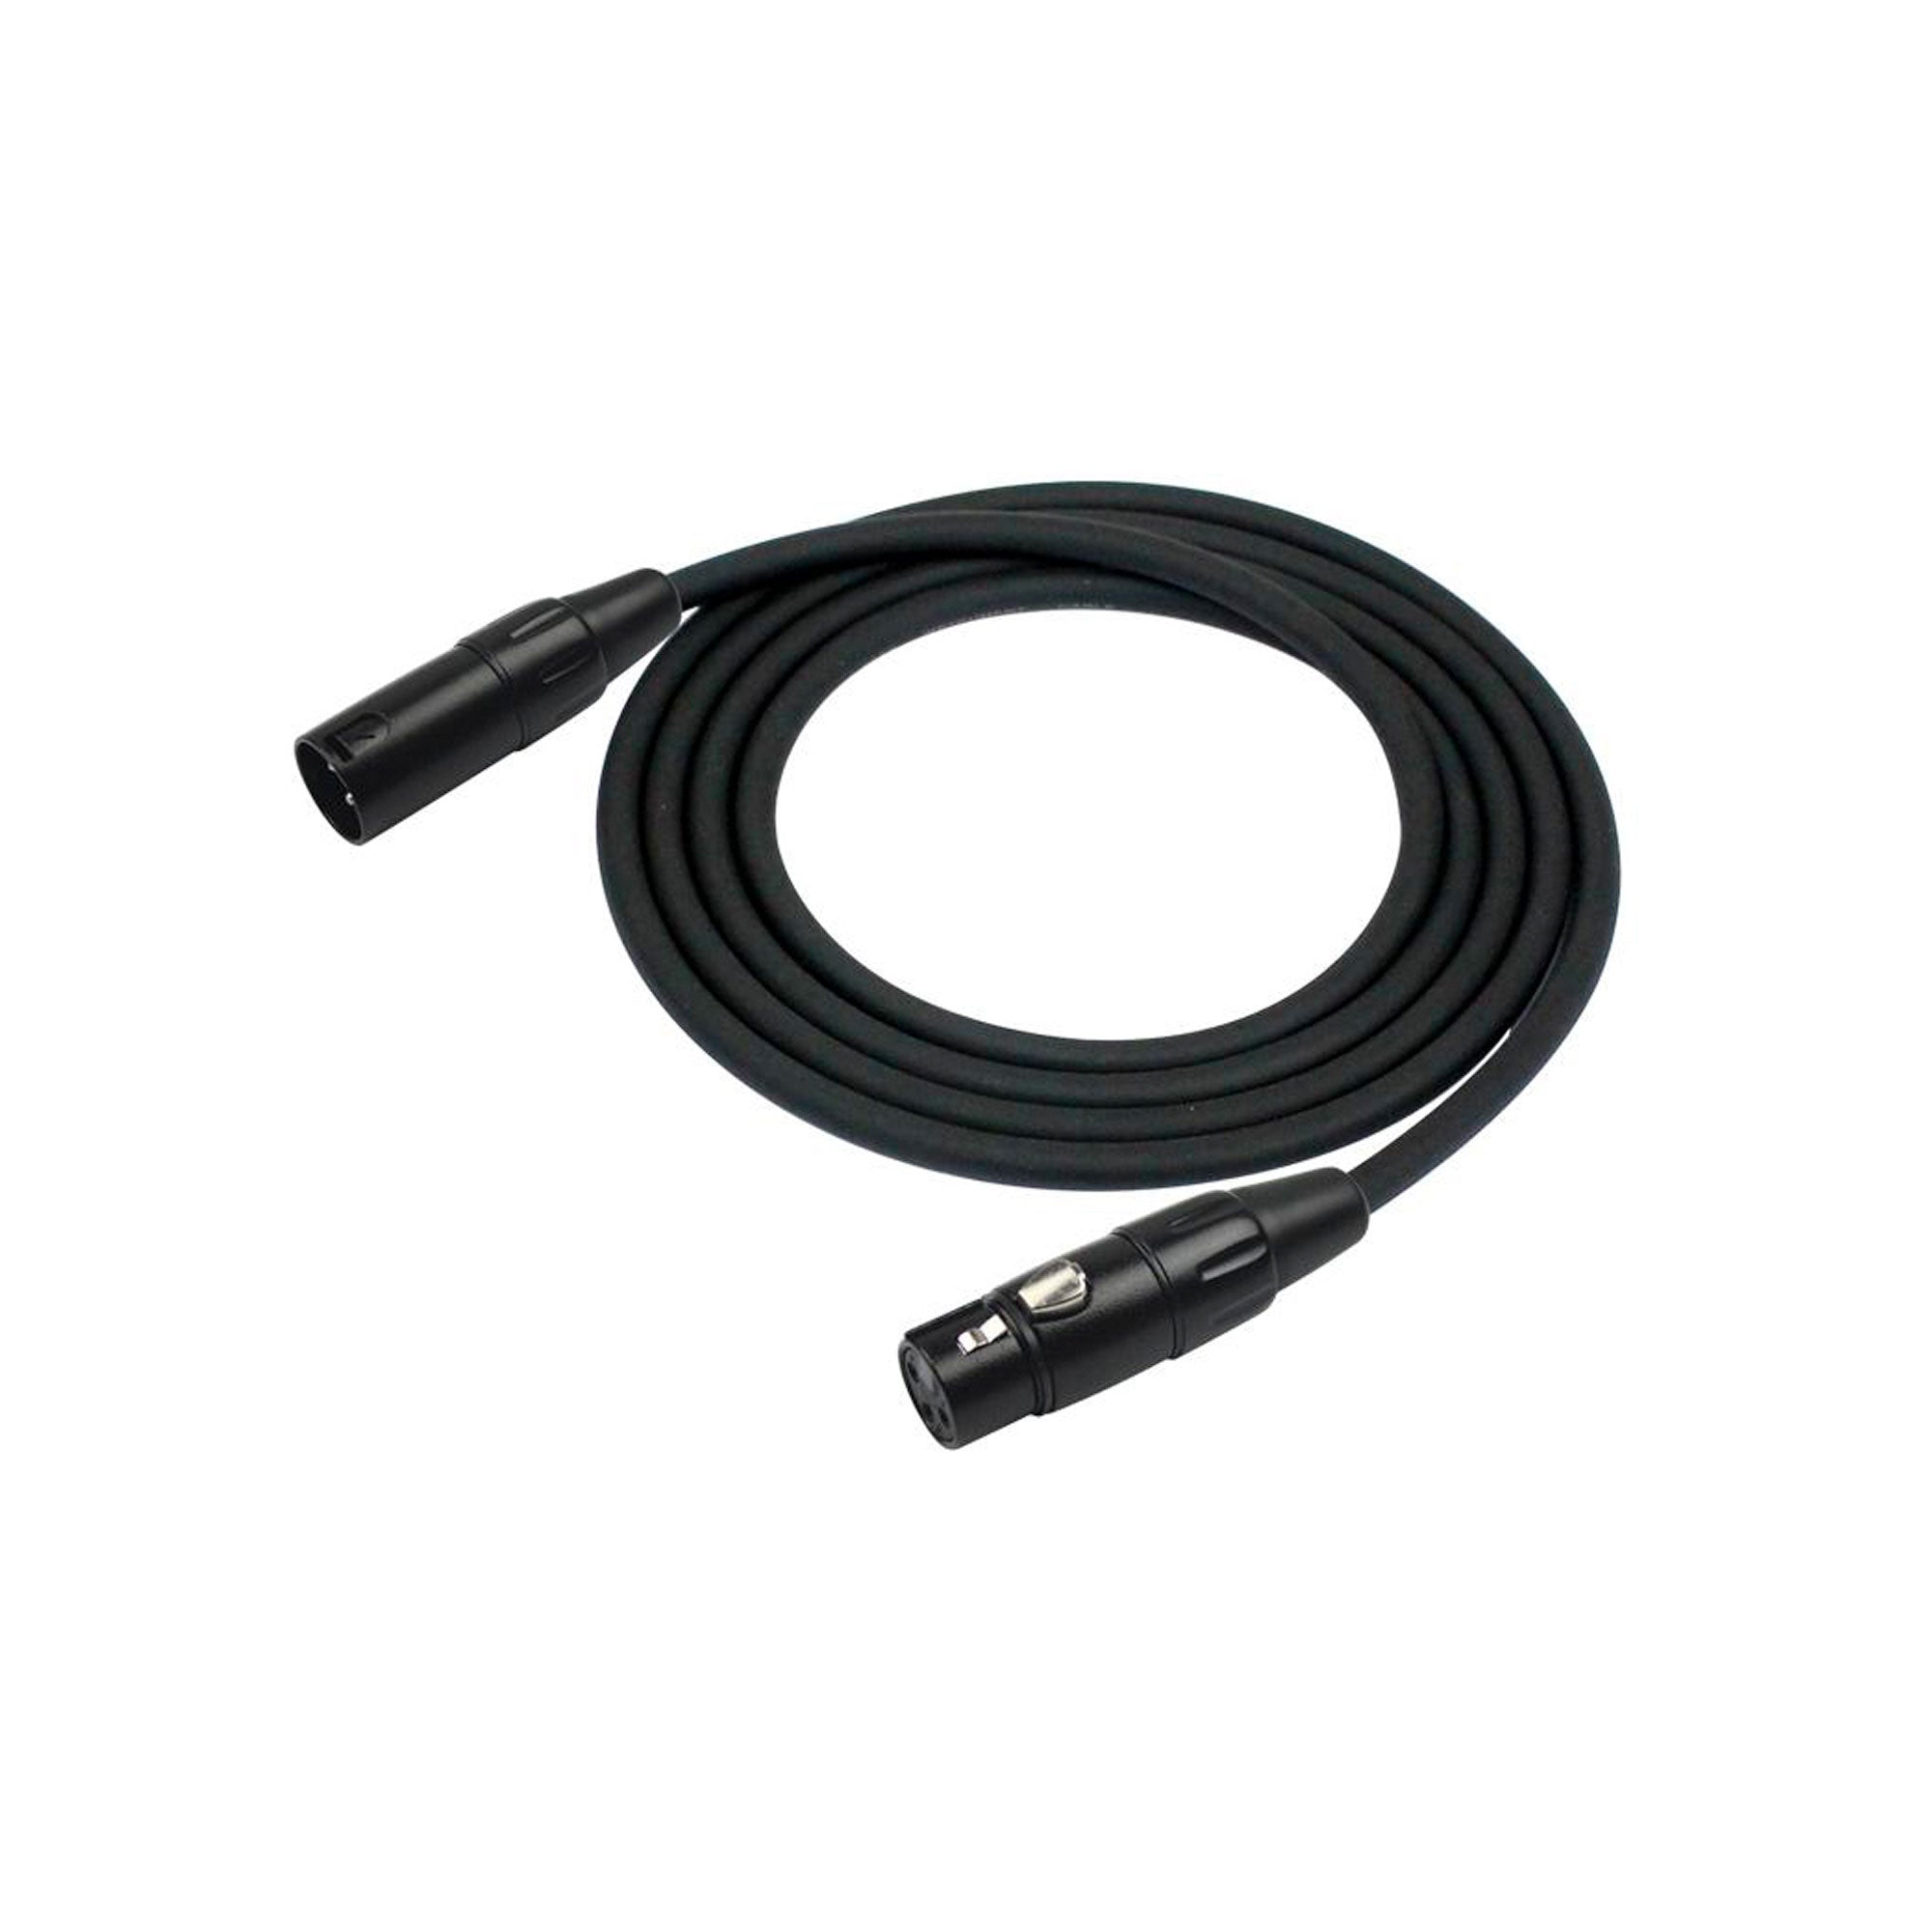 Kirlin Microphone Cable 1M 20AWG XLR M-F Black